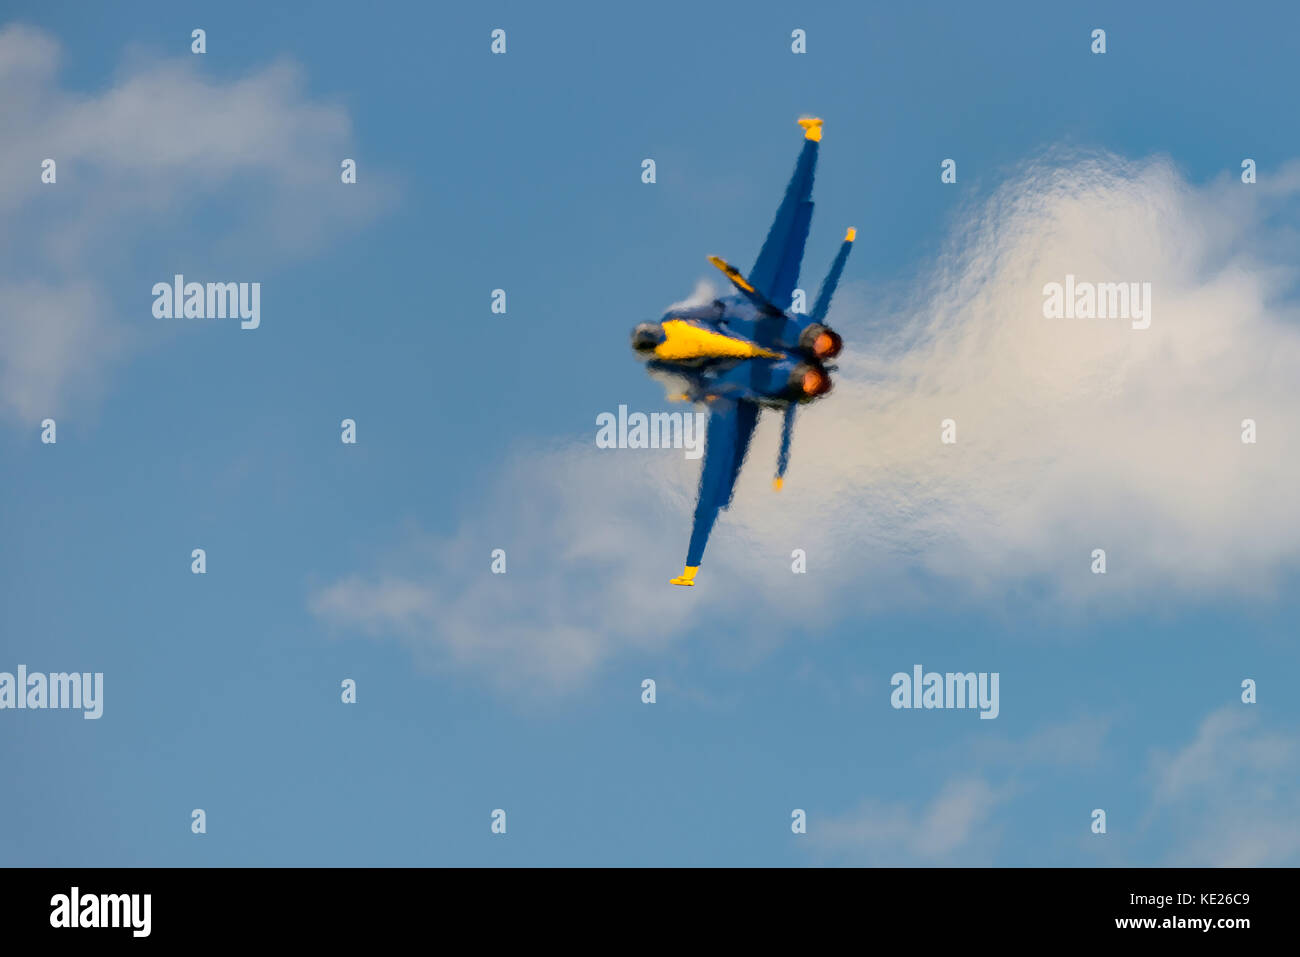 NEW WINDSOR, NY - JULY 2, 2017: U.S.NAVY Blue Angles perform at the Stewart International Airport during the New York Airshow. Squadron is the officia Stock Photo